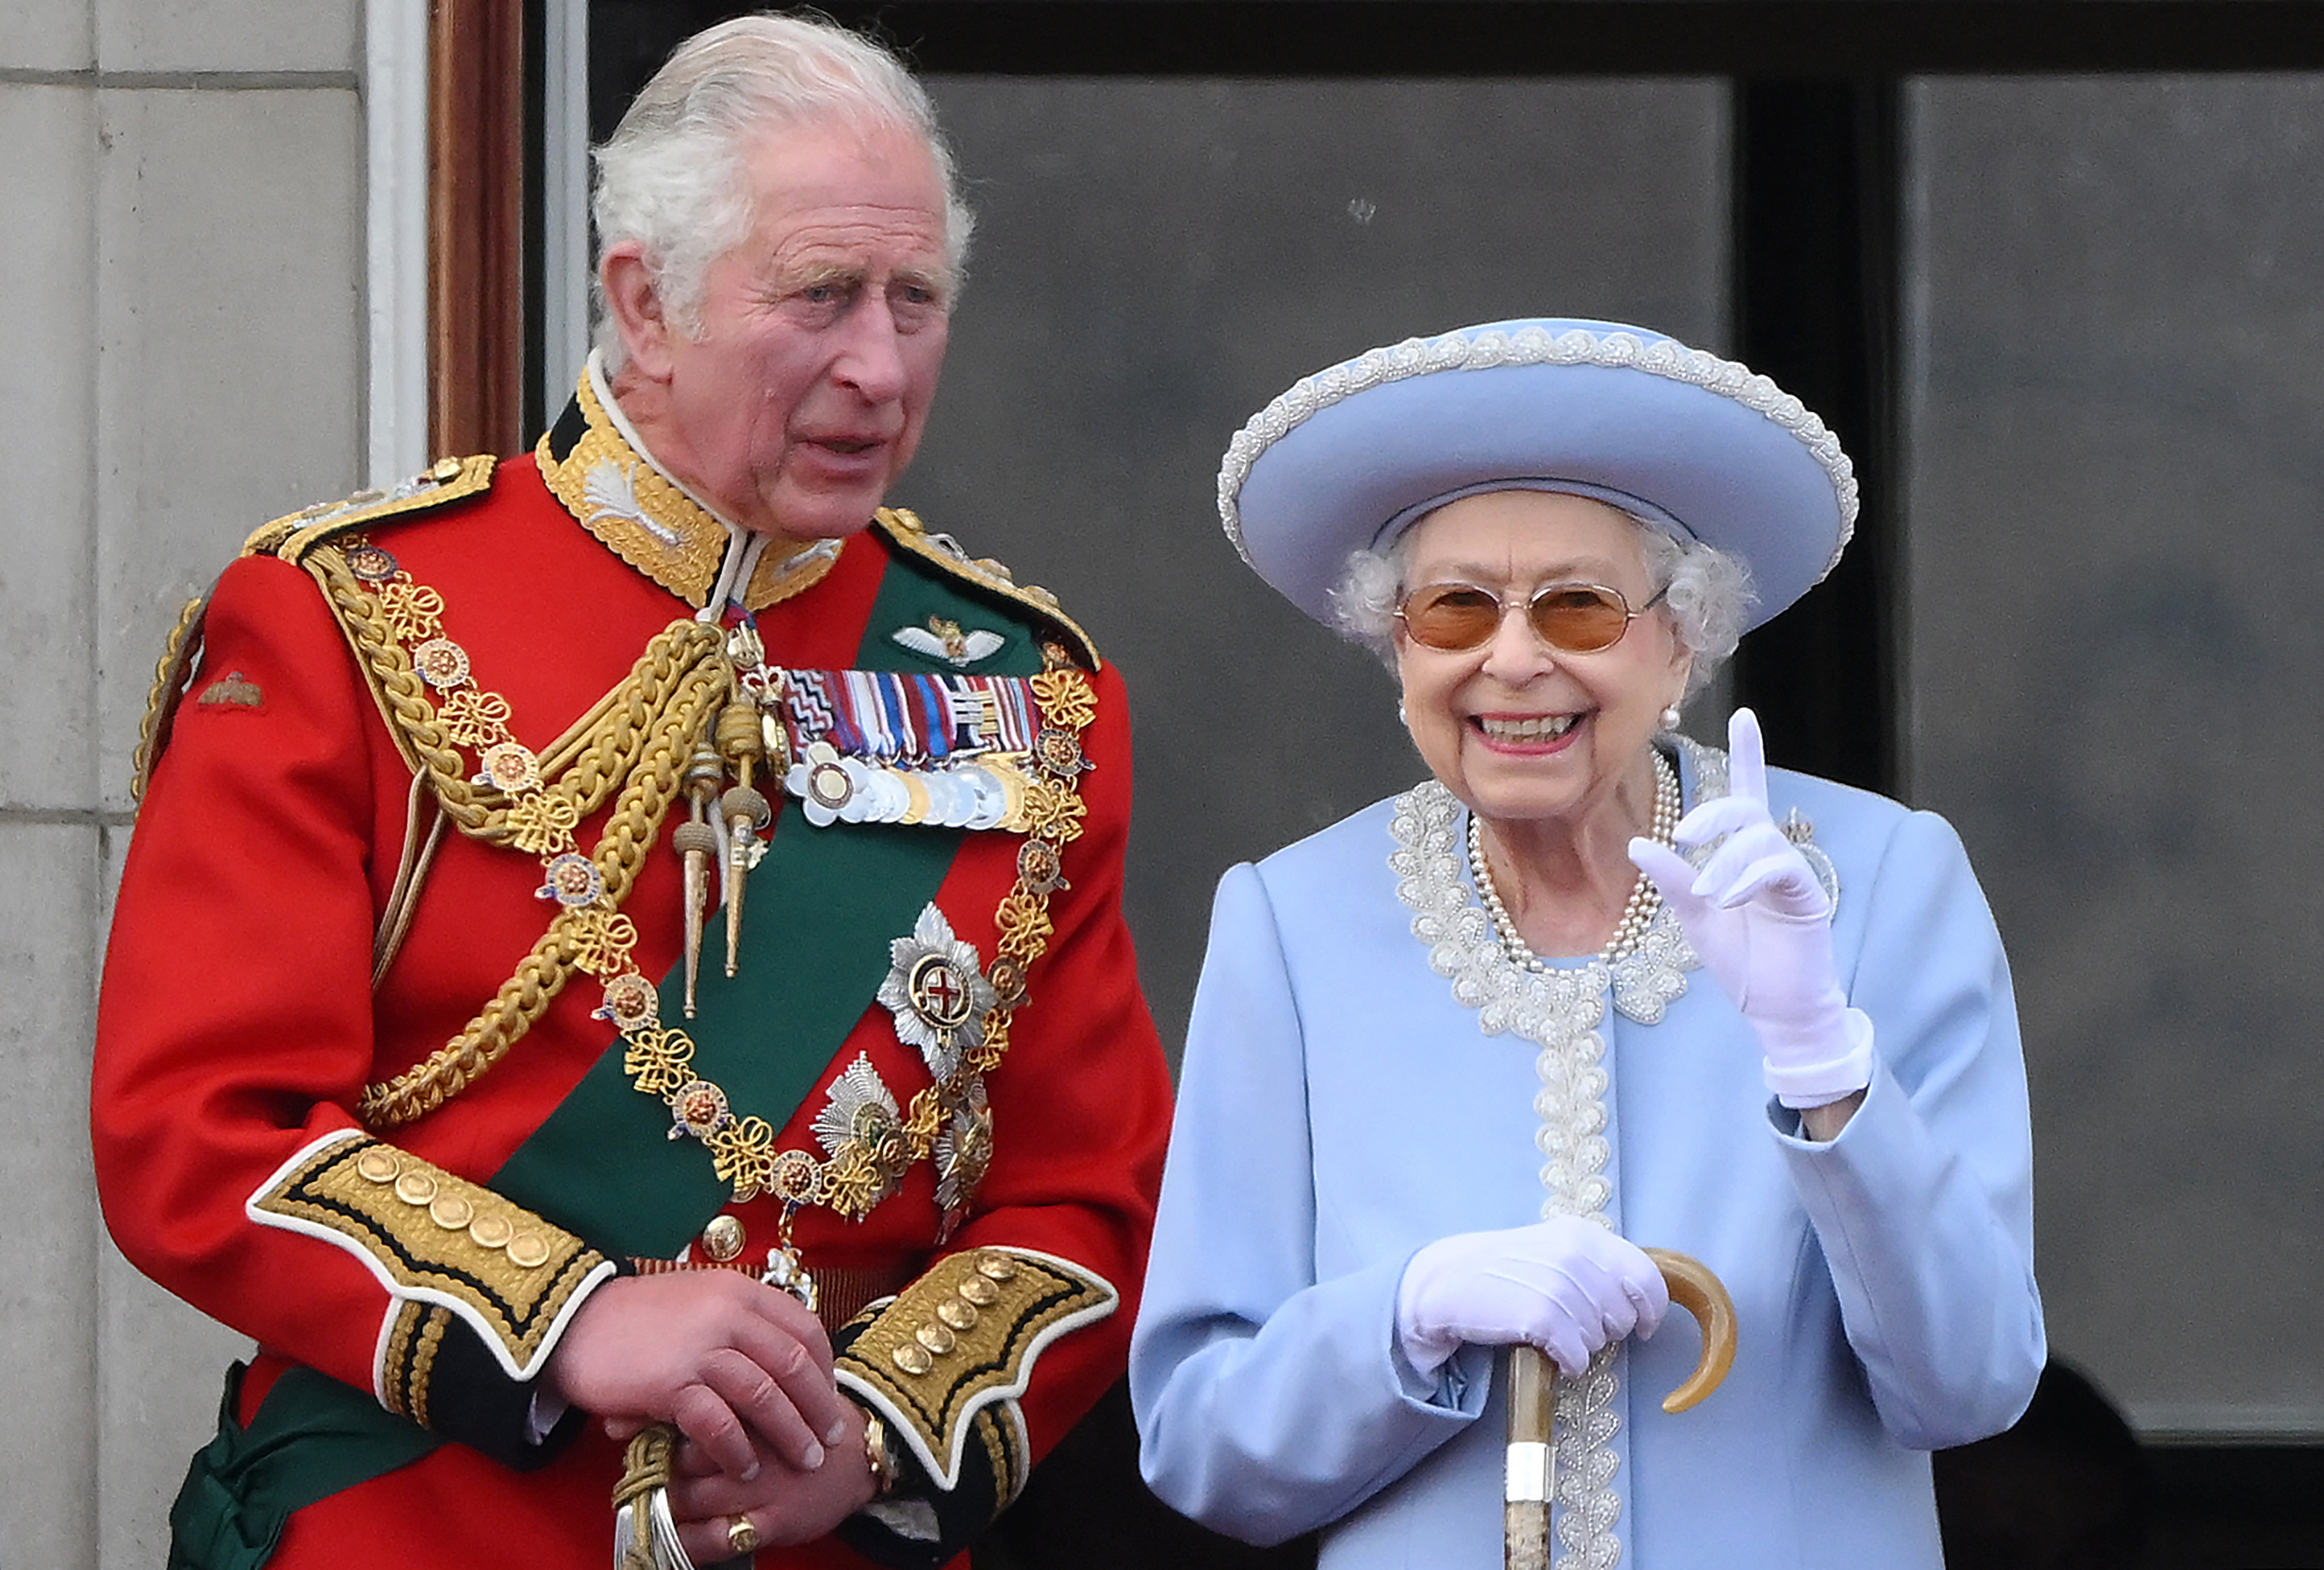 King Charles and Queen Elizabeth II watch a special flypast from Buckingham Palace balcony during the Trooping the Color on June 2, 2022 in London. | Source: Getty Images